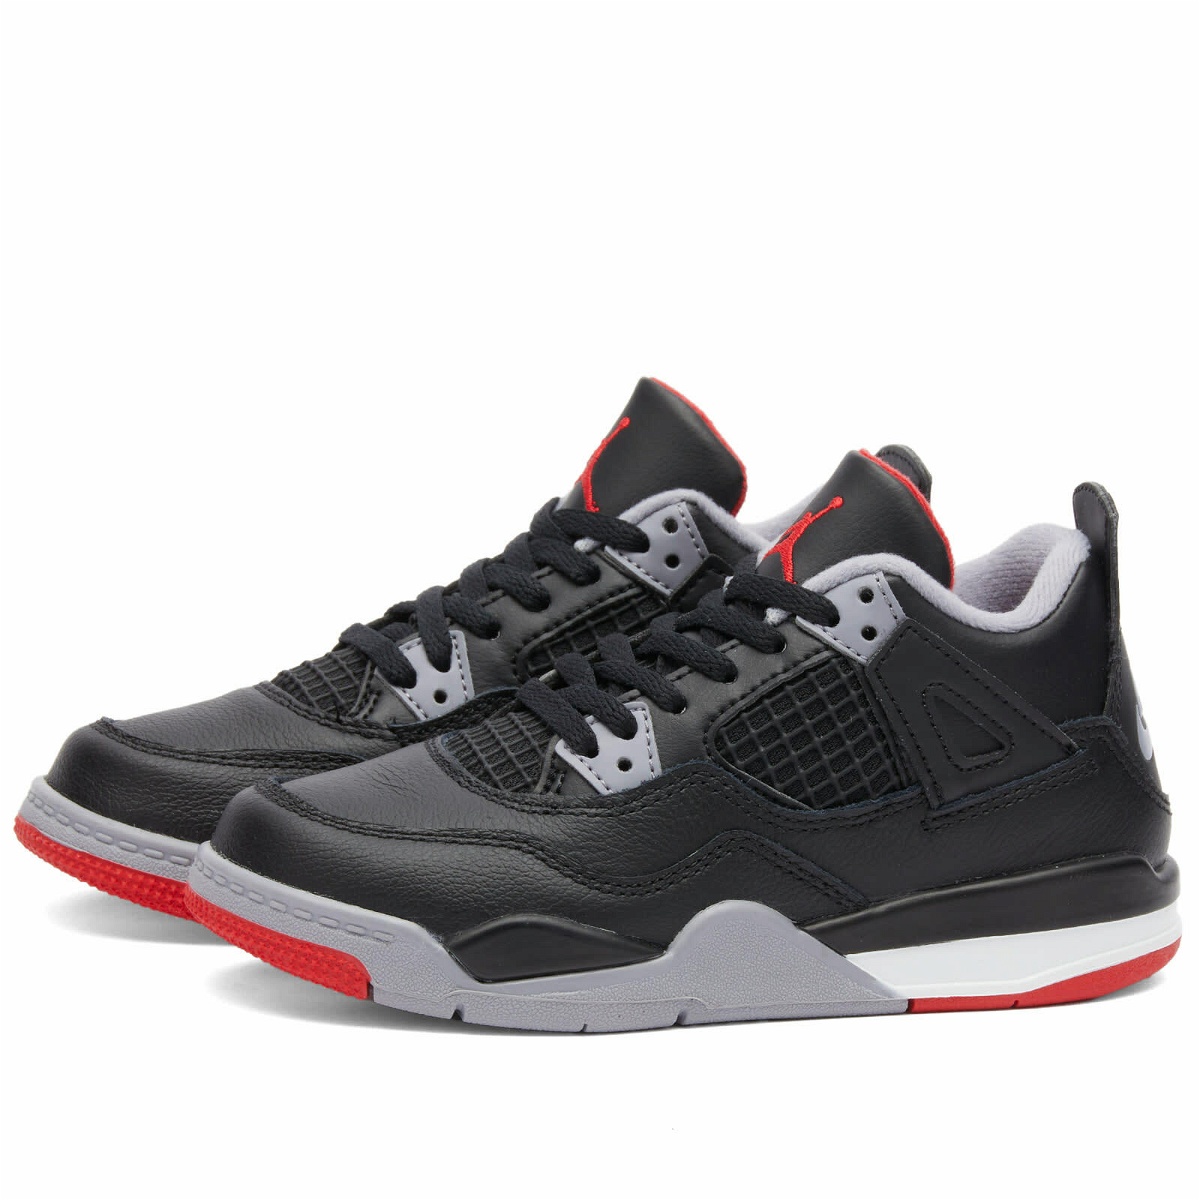 Photo: Air Jordan 4 Retro "Bred Reimagined" PS Sneakers in Fire Red/Cement Grey/Summit White